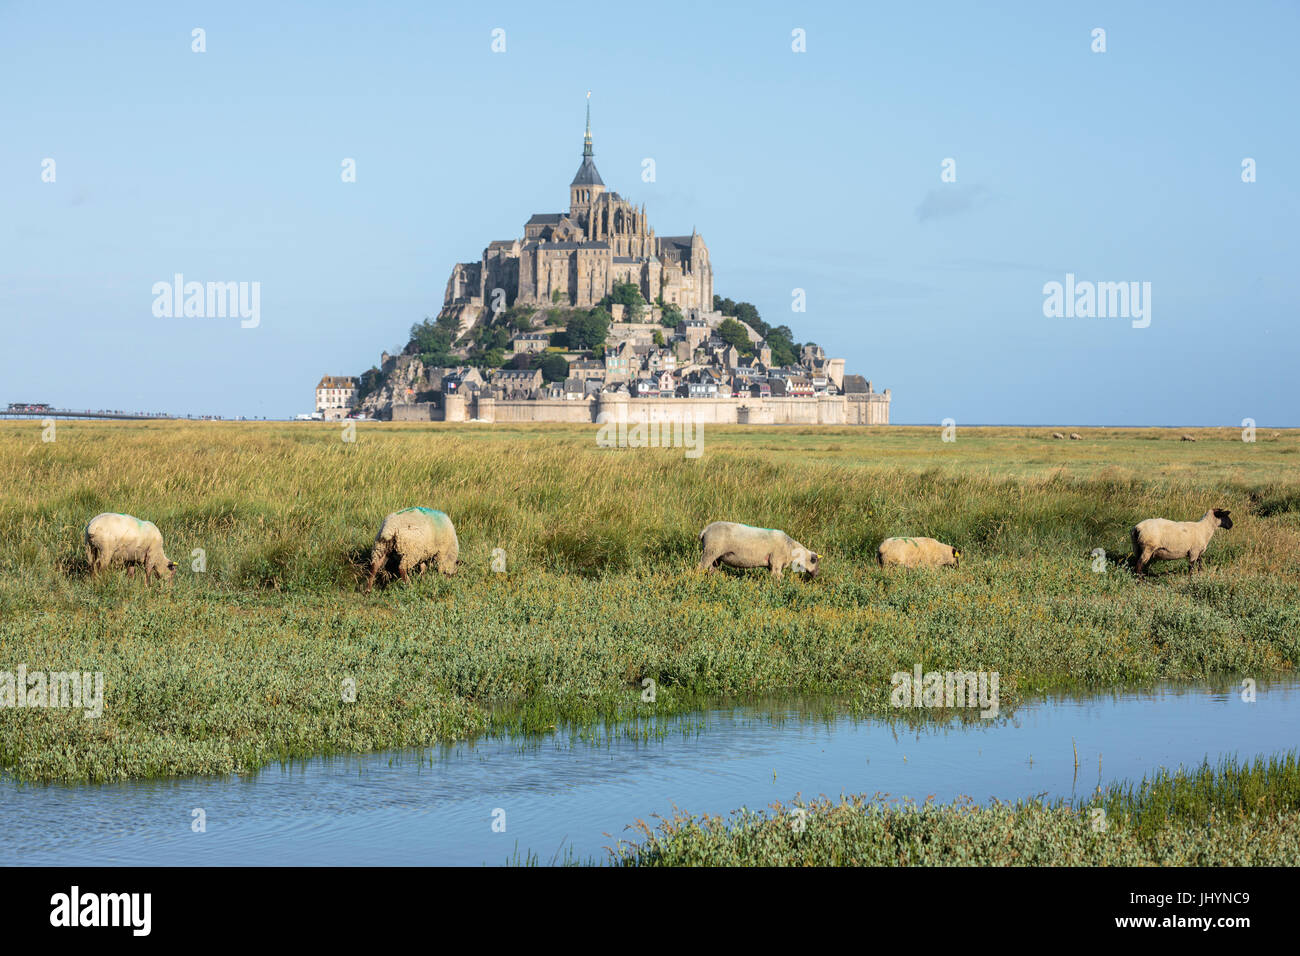 Sheep grazing with the village in the background, Mont-Saint-Michel, UNESCO World Heritage Site, Normandy, France, Europe Stock Photo